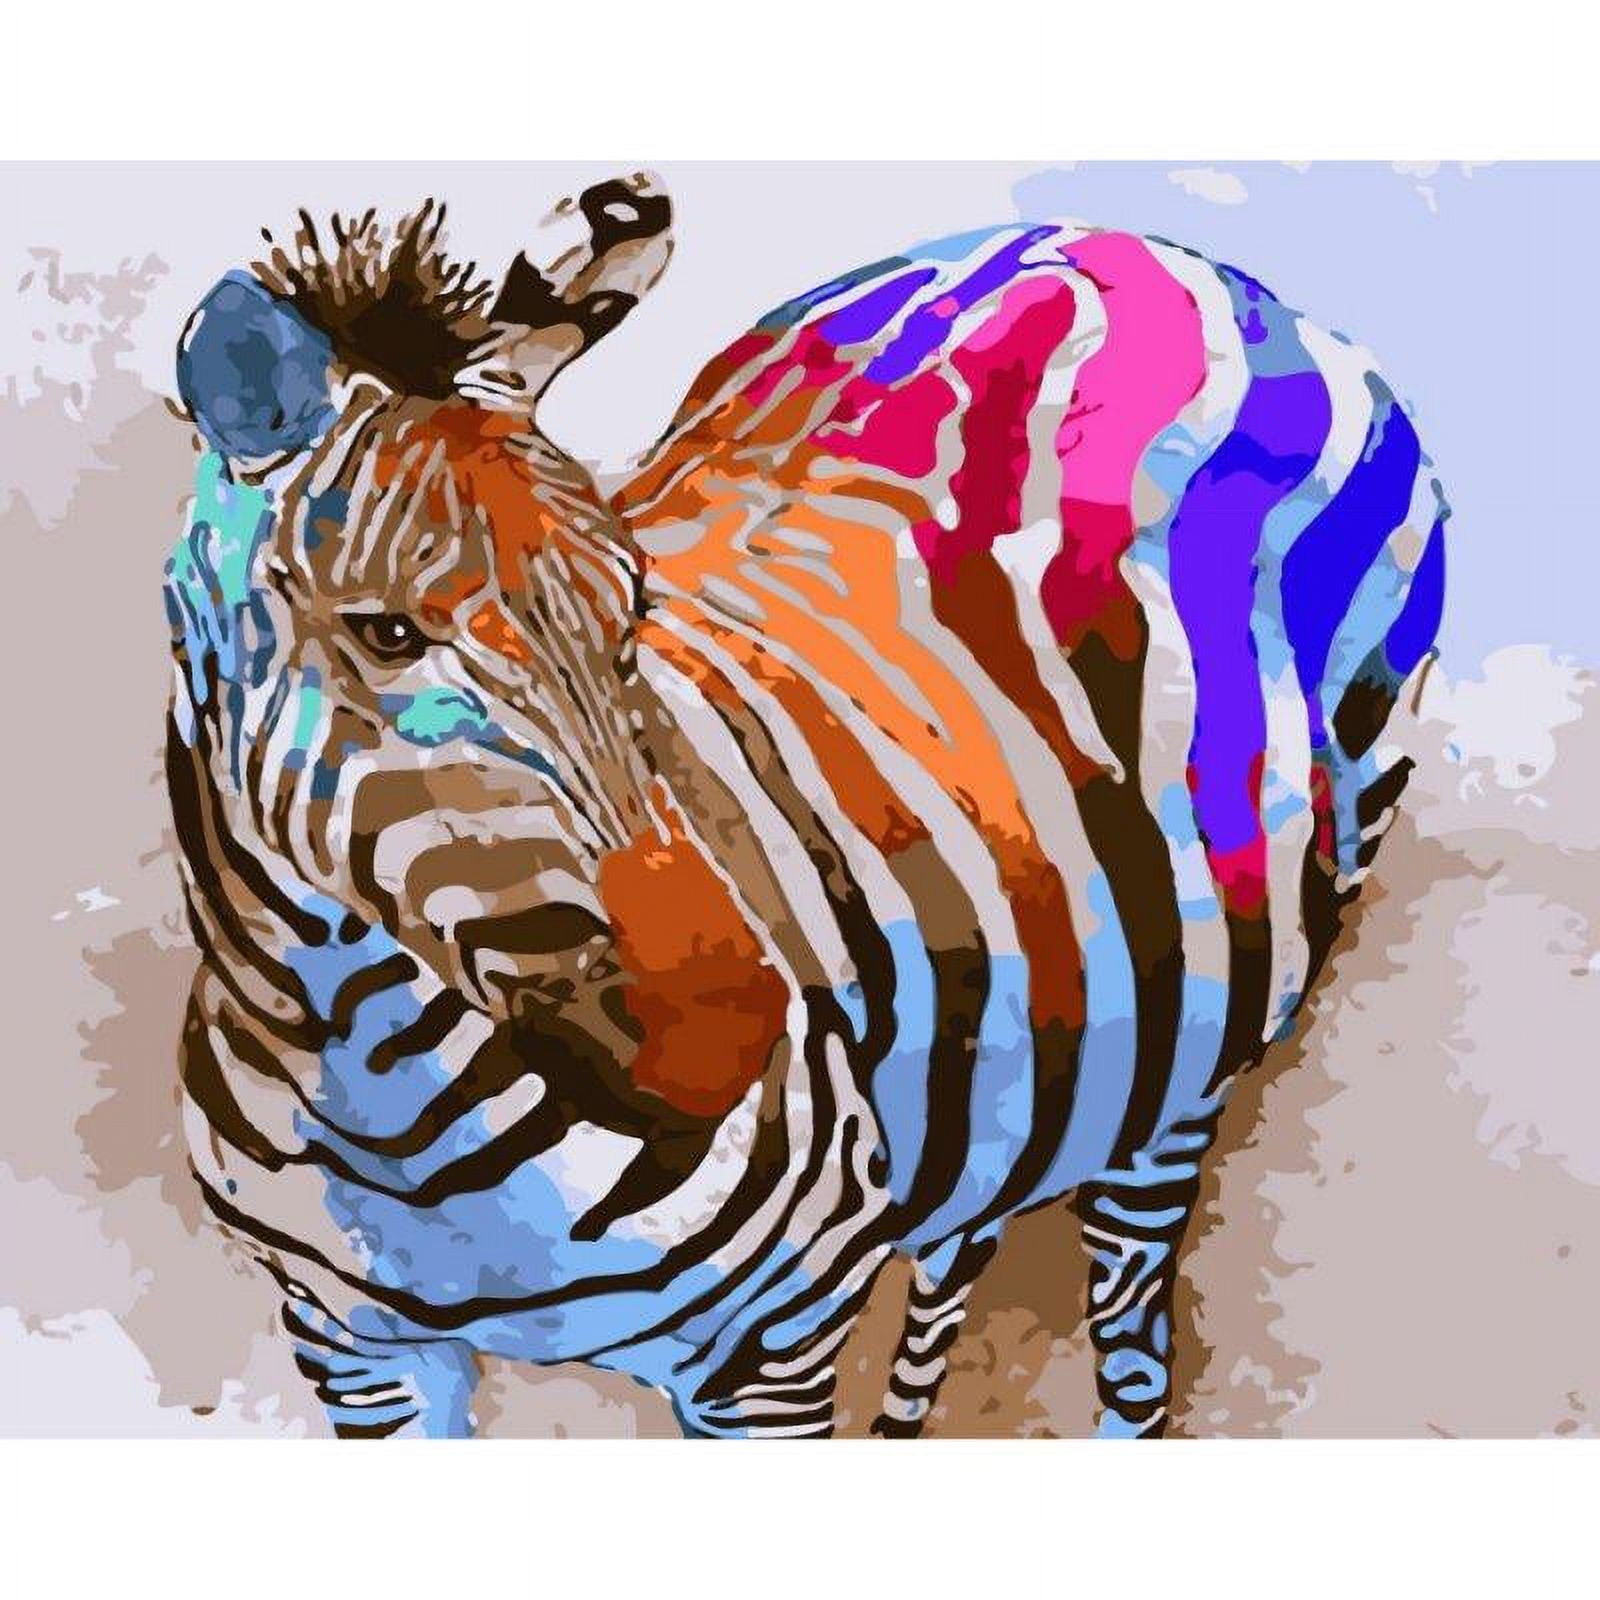  TSVETNOY Paint by Numbers for Adults Canvas Framed 12x16 -  Adult Paint by Number Kits with Acrylic Paints 3 Brushes - DIY Oil Painting  Animals - Colorful Zebra with Glasses